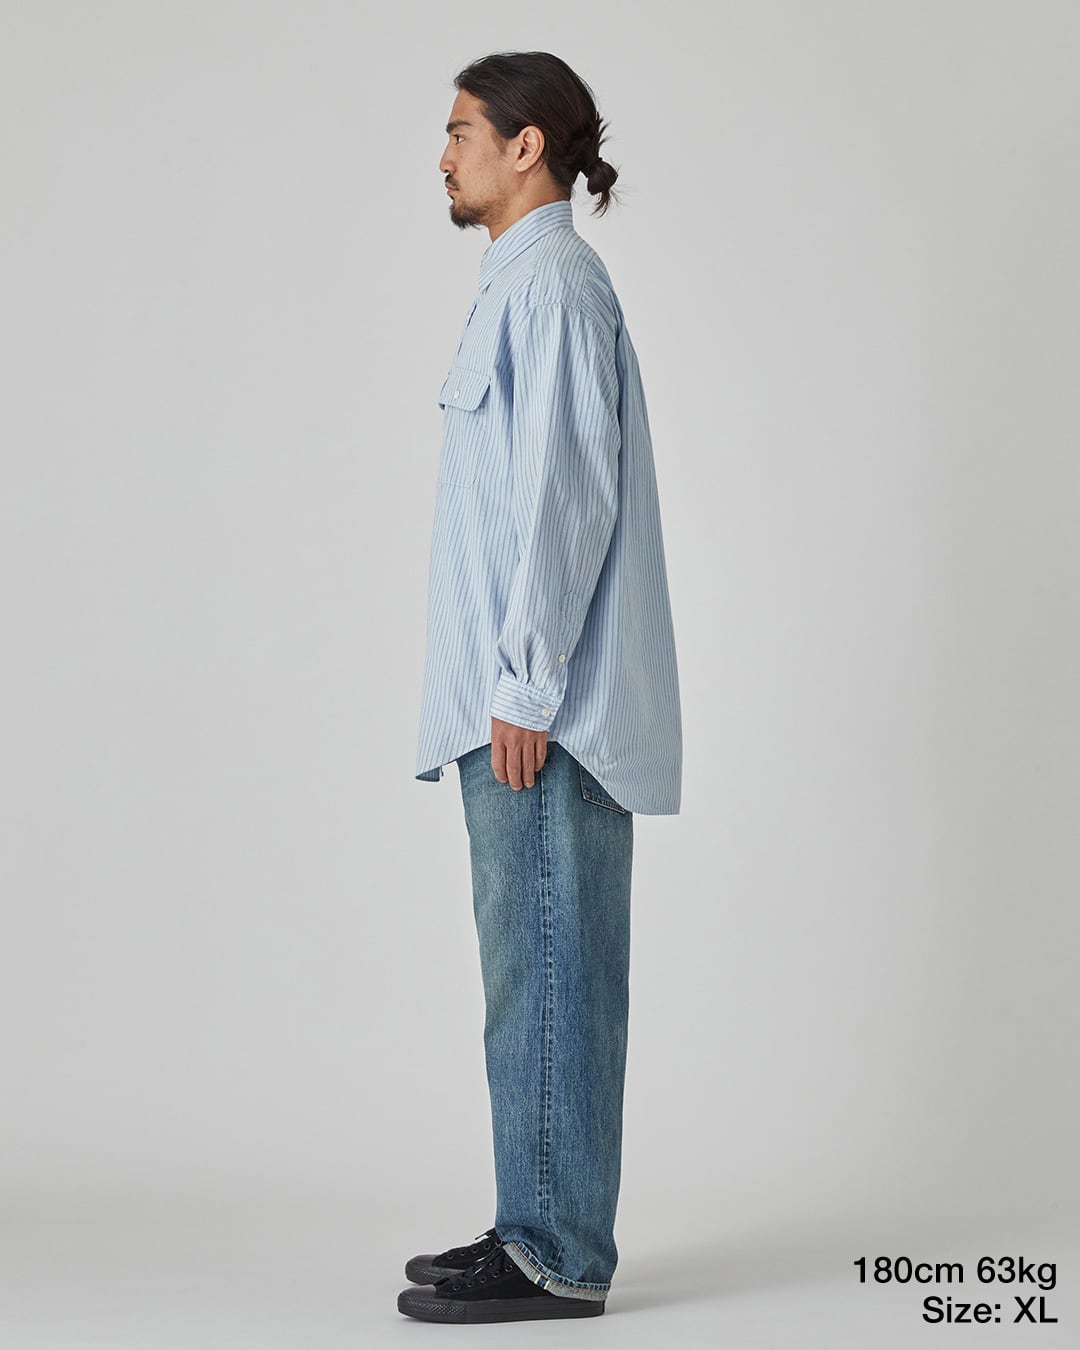 Just Right “Selvedge Stripe Shirt” Sax | Just Right